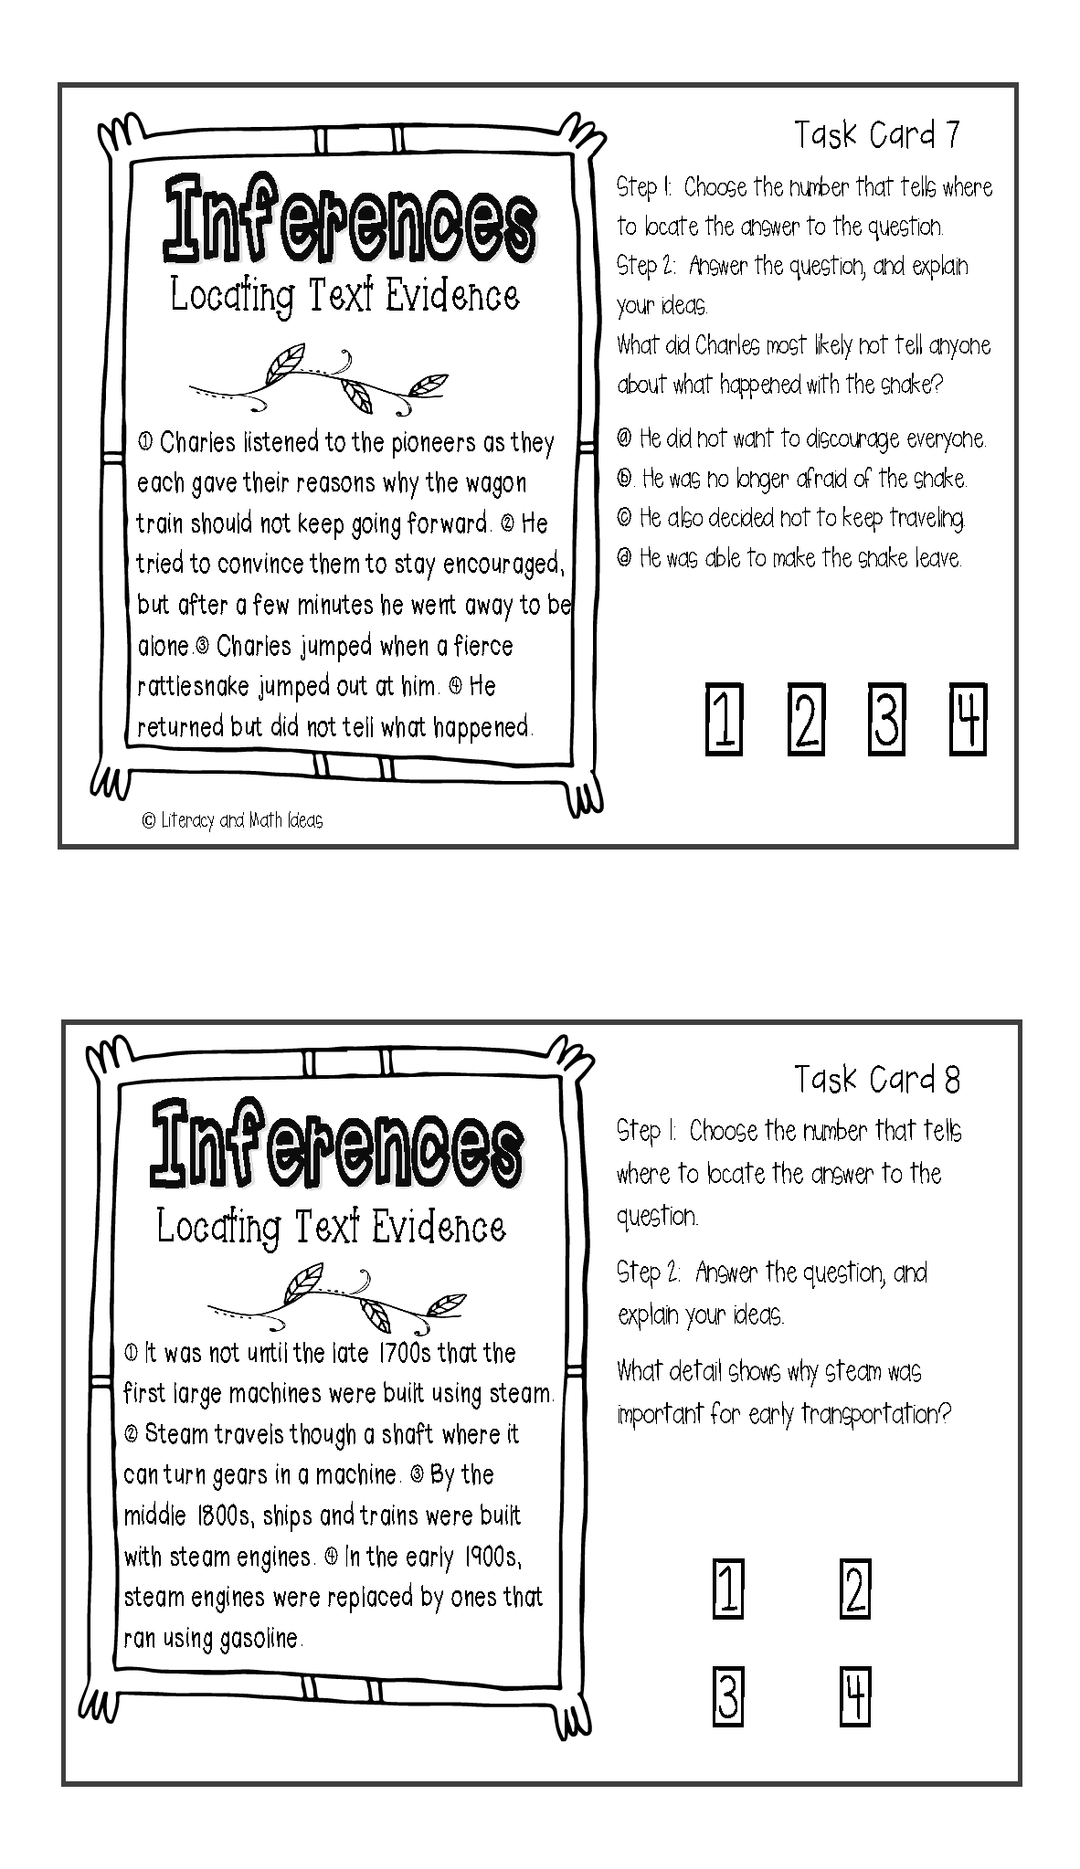 Inference Task Cards: Locating Text Evidence